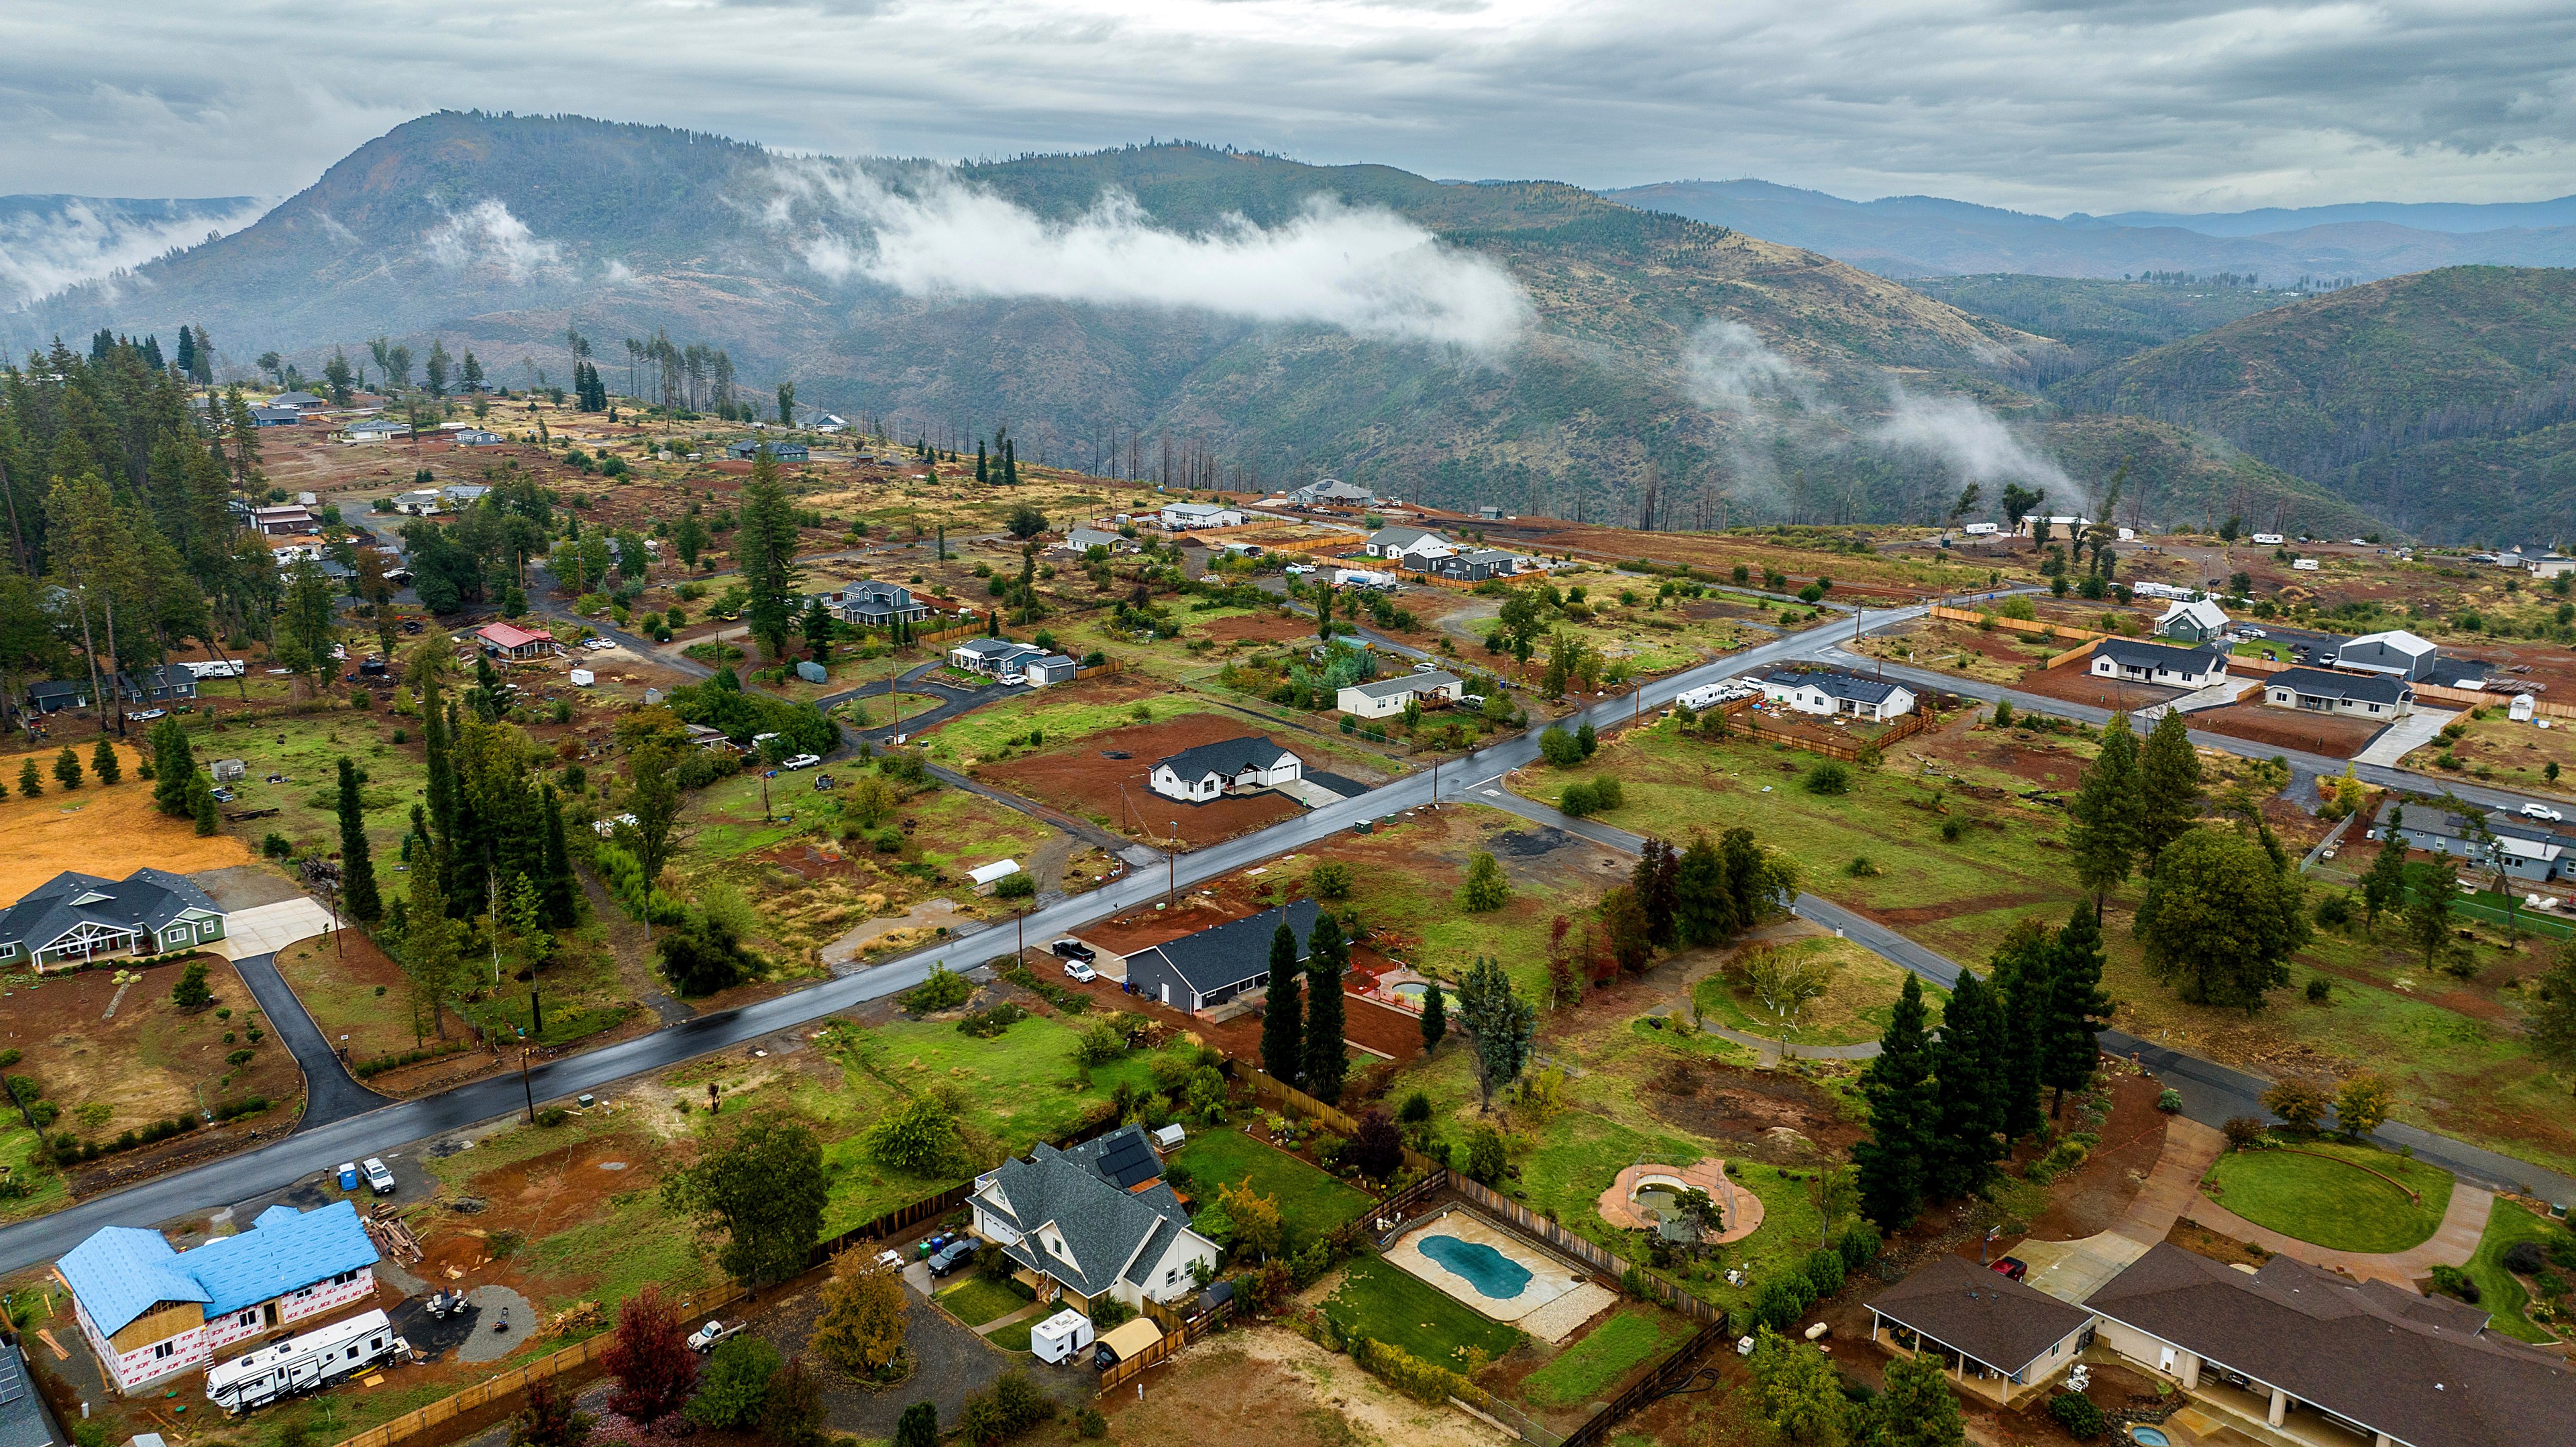 Overview of the town of Paradise after the 2018 wildfire gutted the twon.